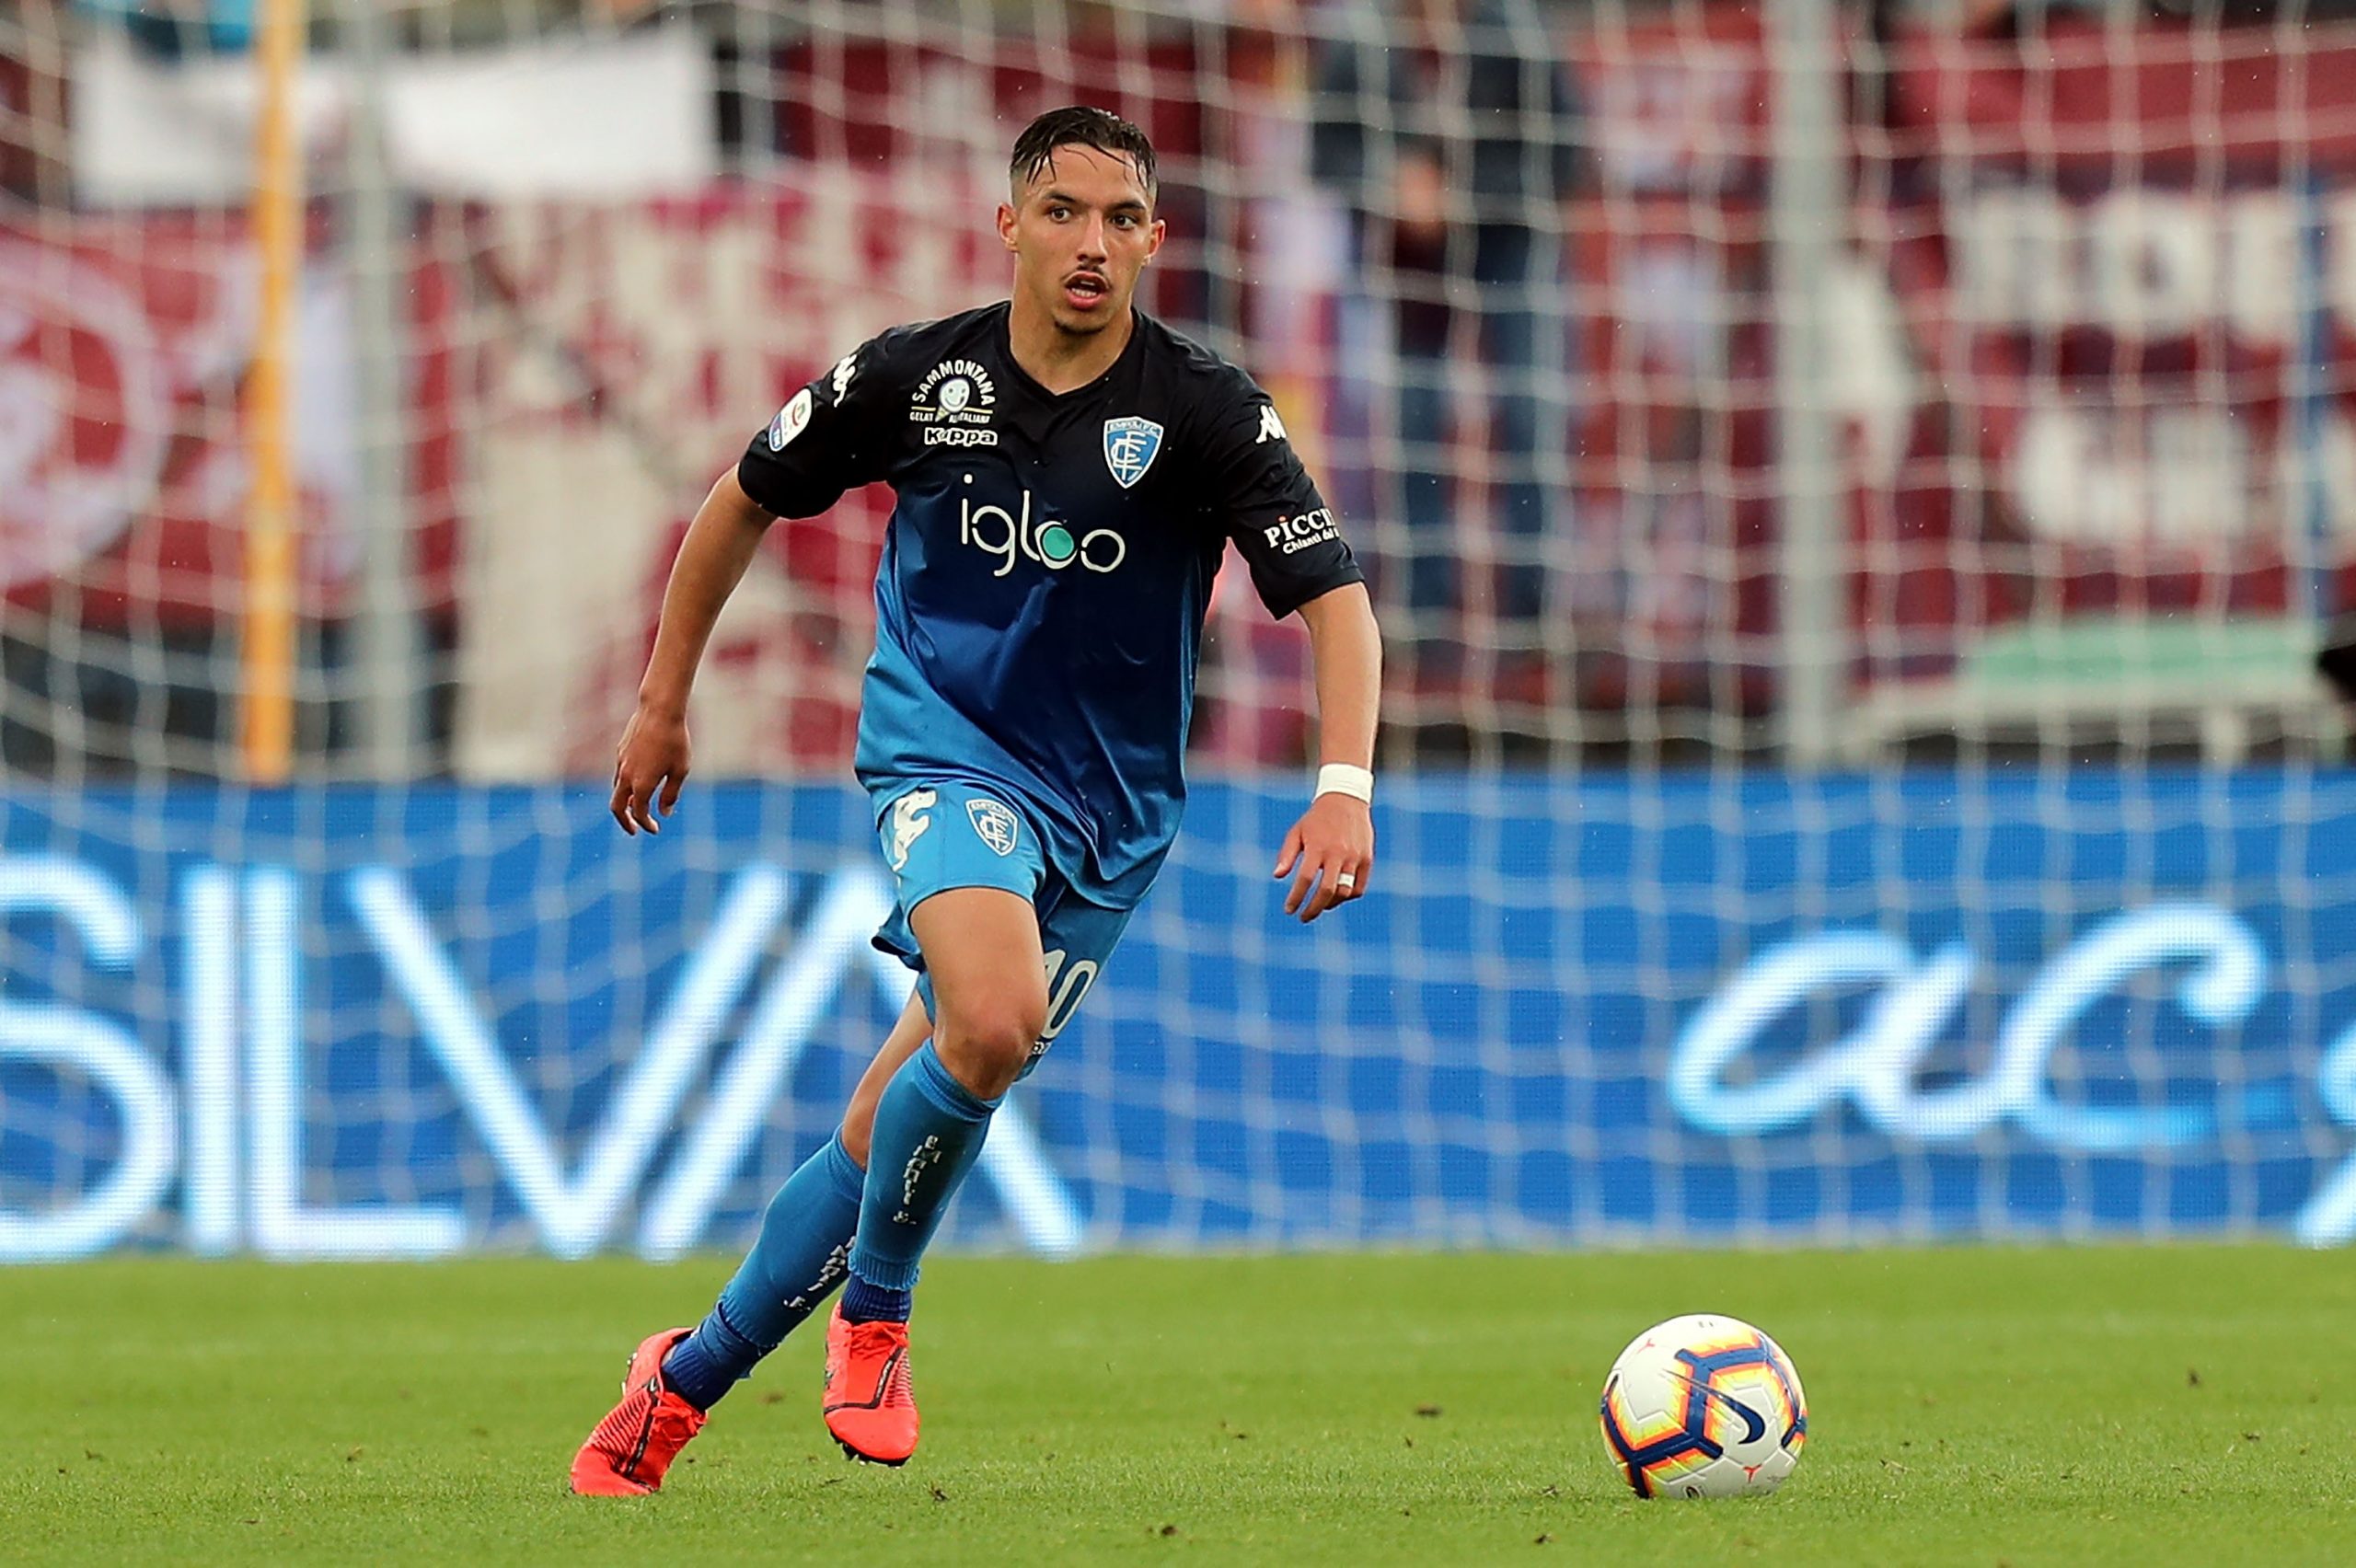 Ismael Bennacer of Empoli FC in action during the Serie A match between Empoli and Torino FC at Stadio Carlo Castellani on May 19, 2019 in Empoli, Italy.  (Photo by Gabriele Maltinti/Getty Images)